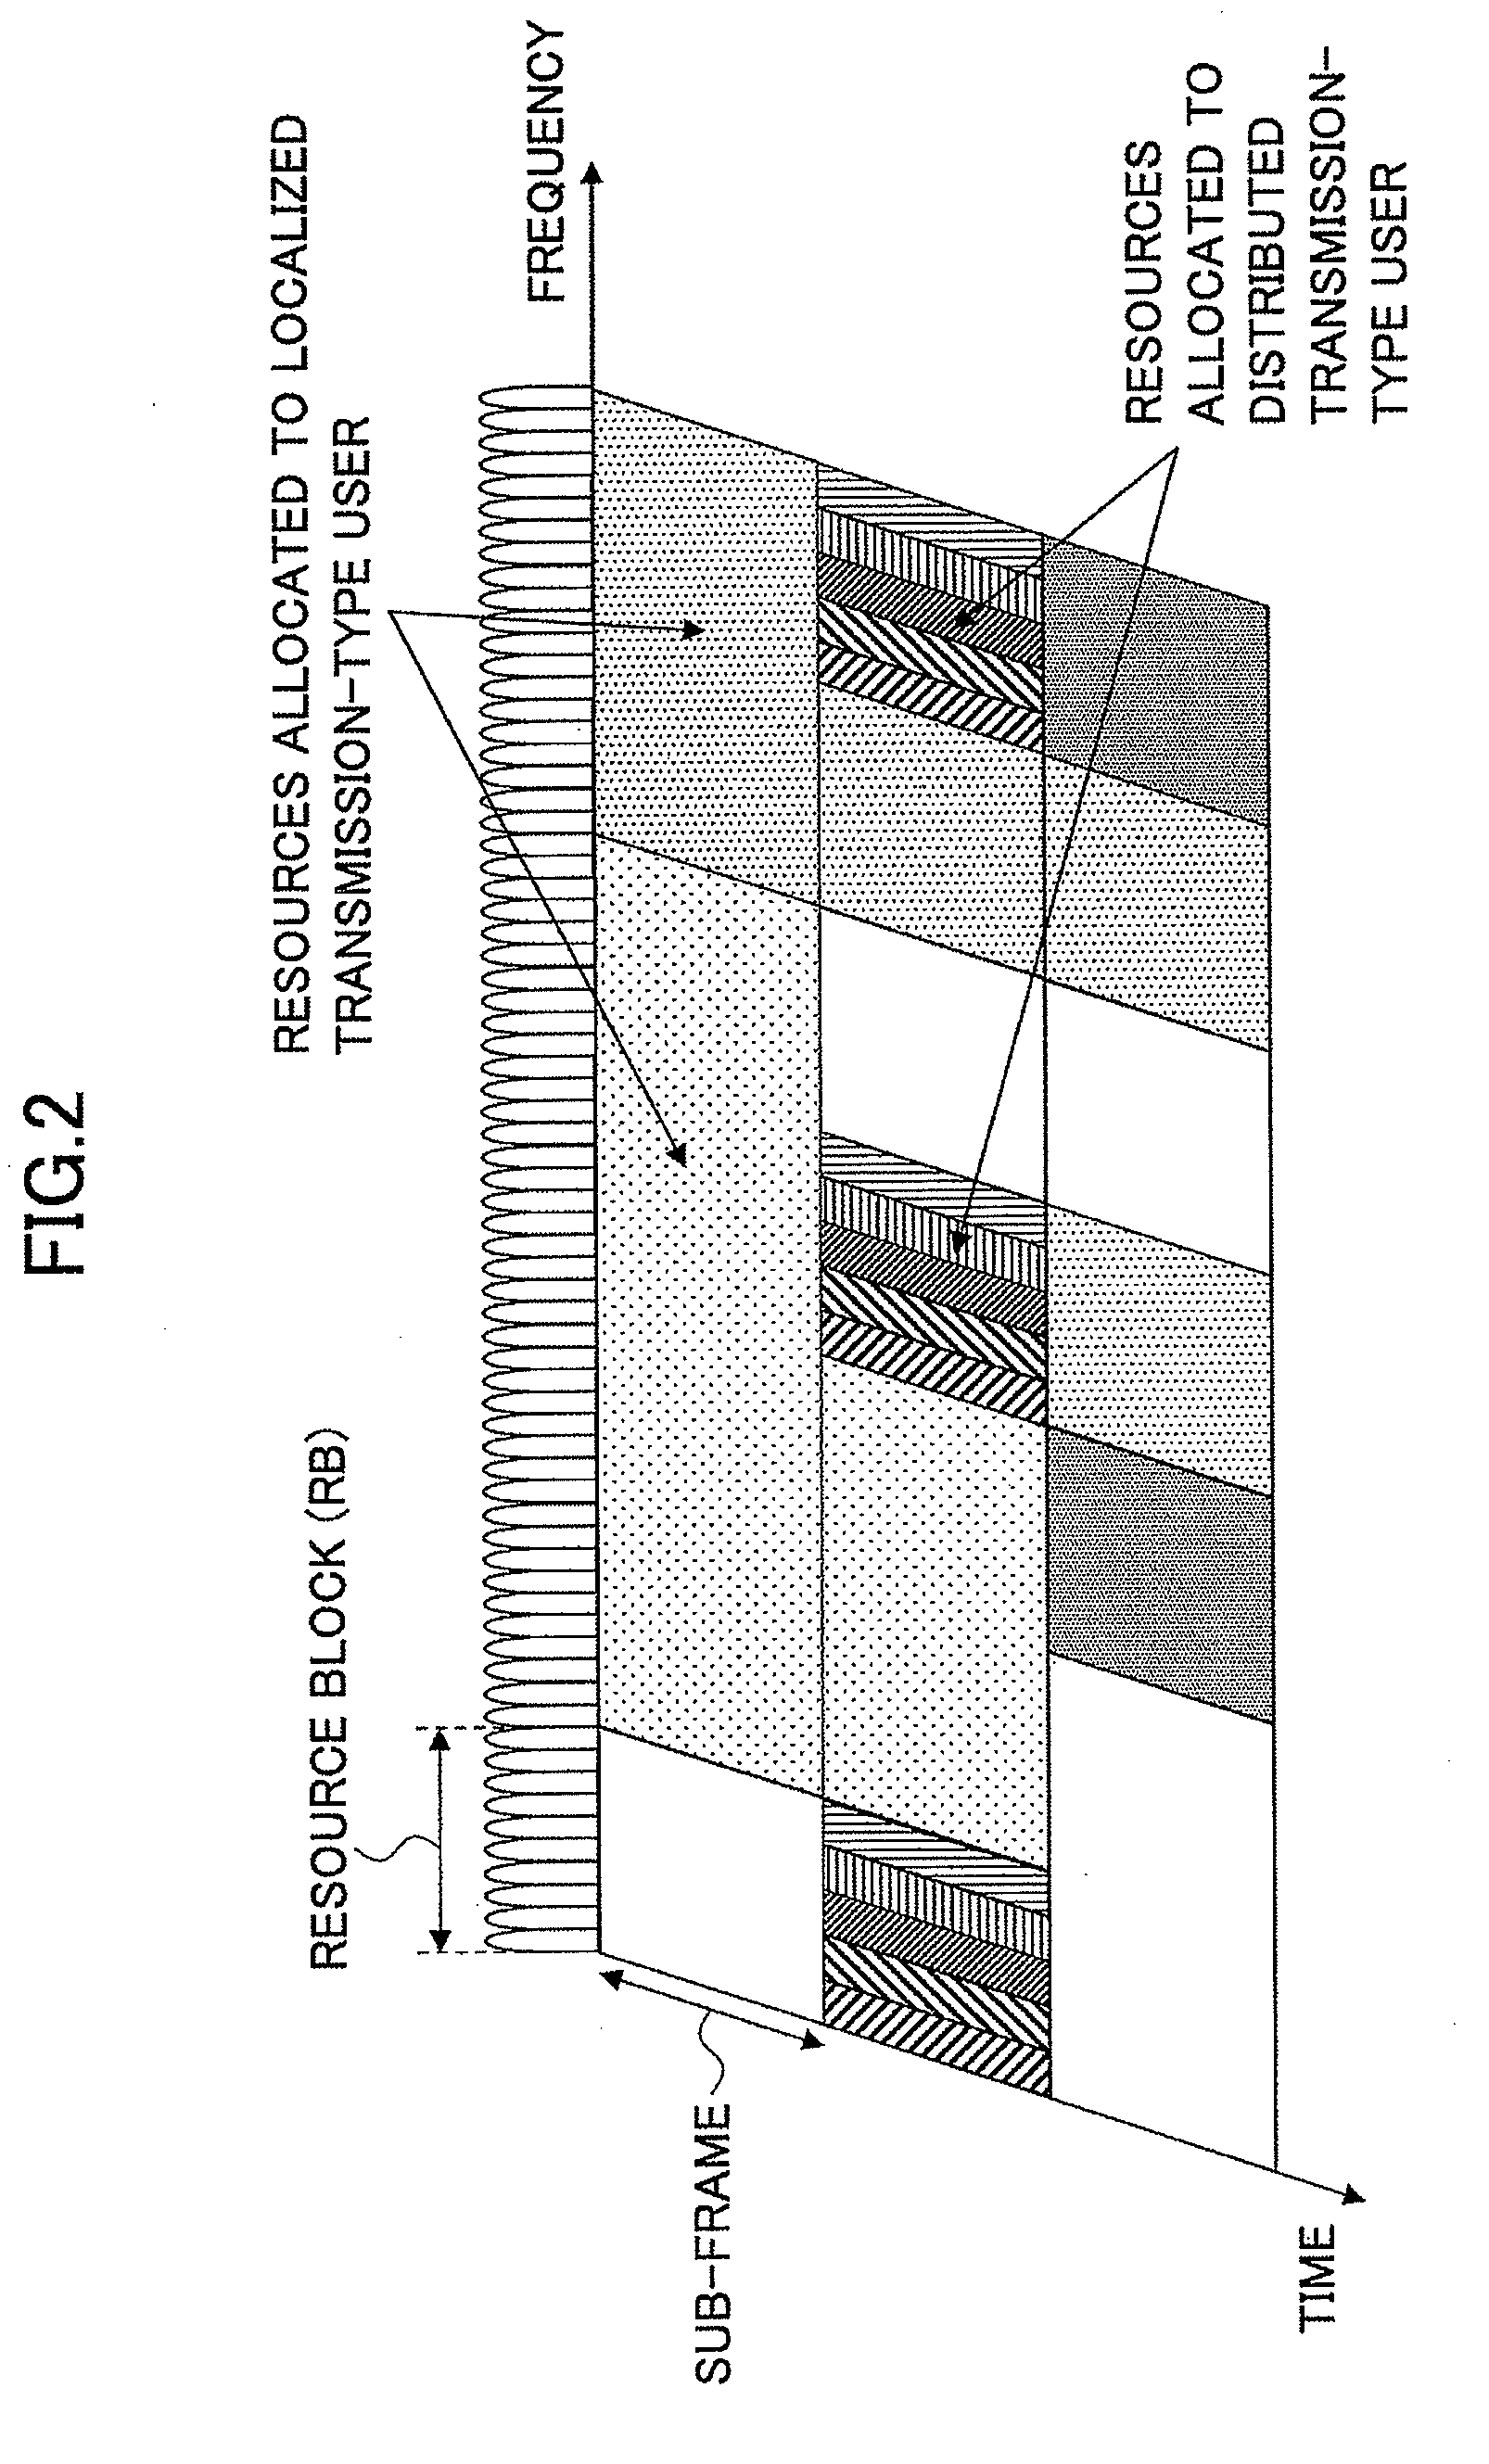 Downlink MIMO transmission control method and base station apparatus